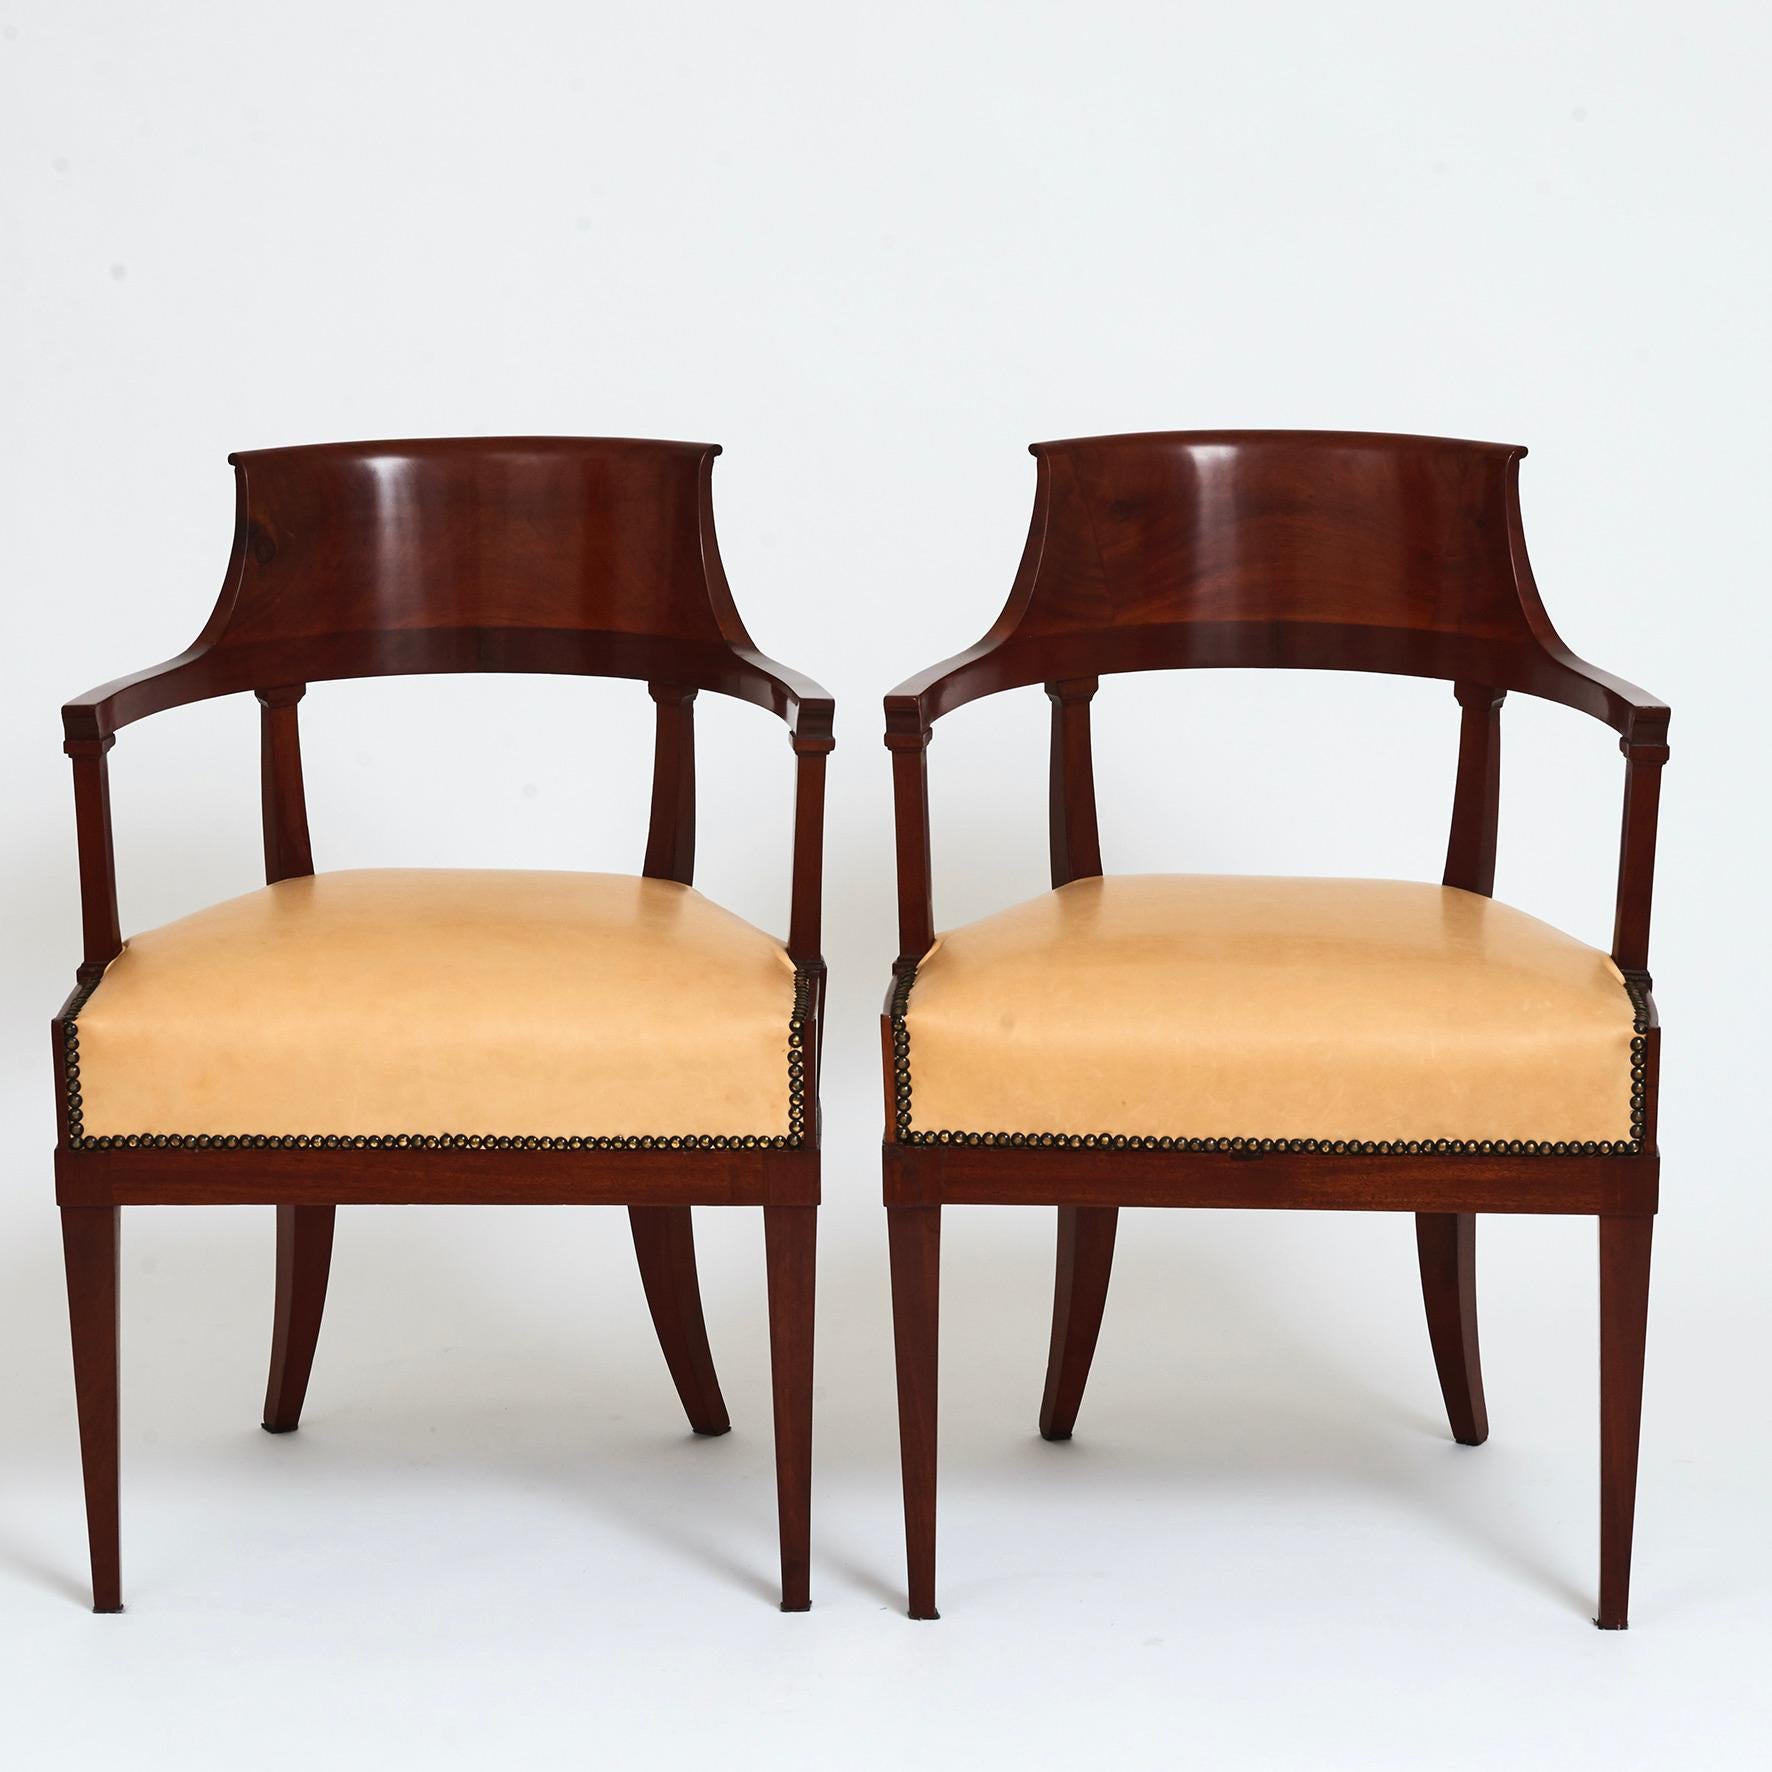 Mahogany Set of Three Swedish Neoclassical Armchairs, First Quarter of the 19th Century